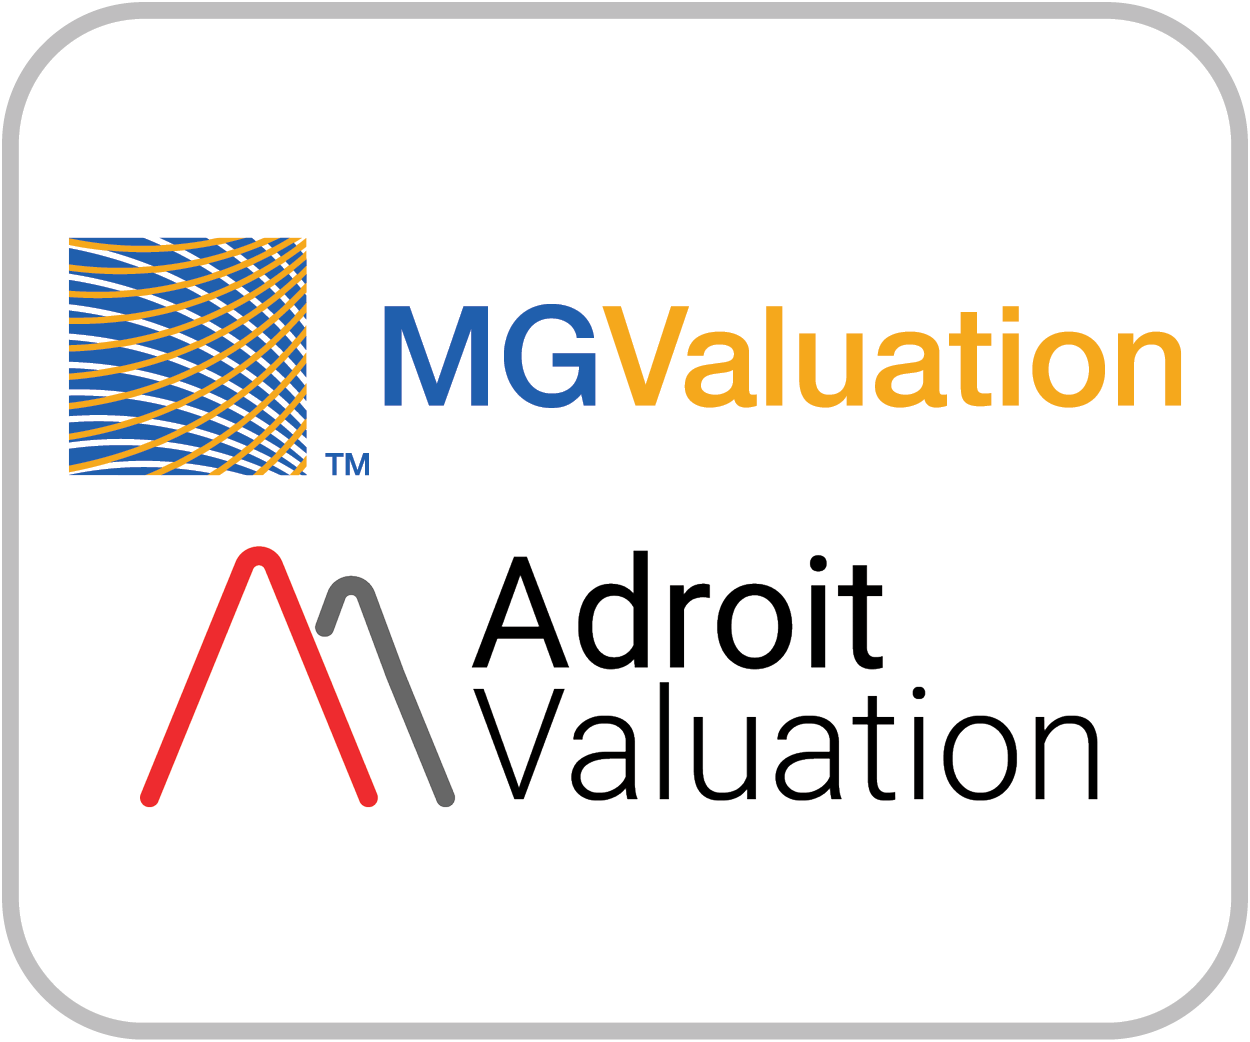 MG Valuation Adroit Valuation